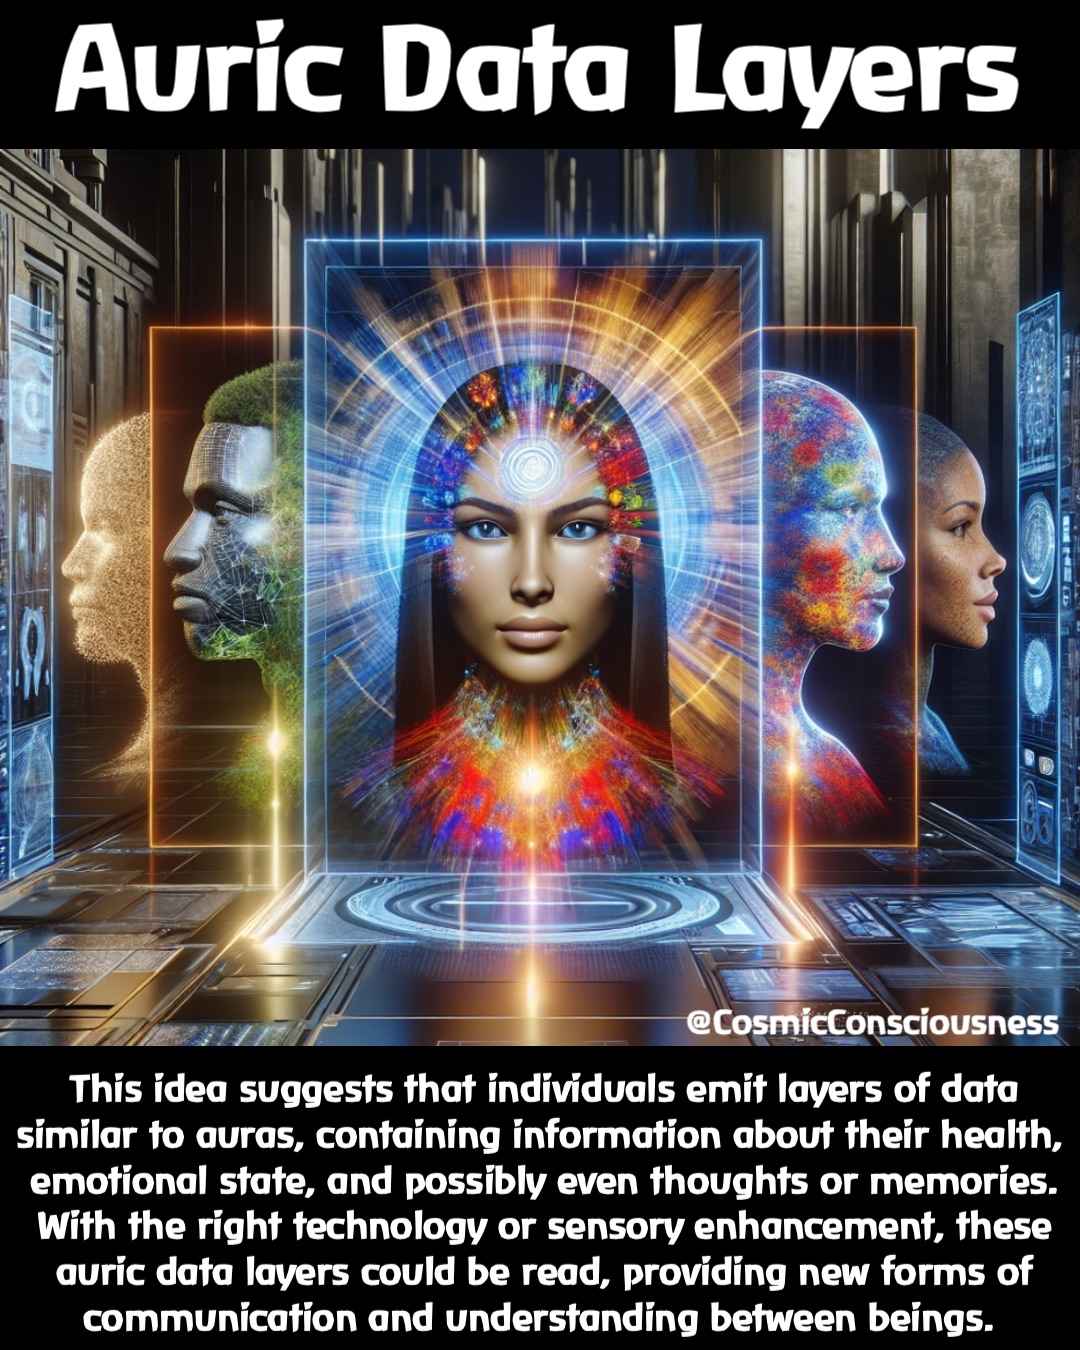 This idea suggests that individuals emit layers of data similar to auras, containing information about their health, emotional state, and possibly even thoughts or memories. With the right technology or sensory enhancement, these auric data layers could be read, providing new forms of communication and understanding between beings. Auric Data Layers @CosmicConsciousness